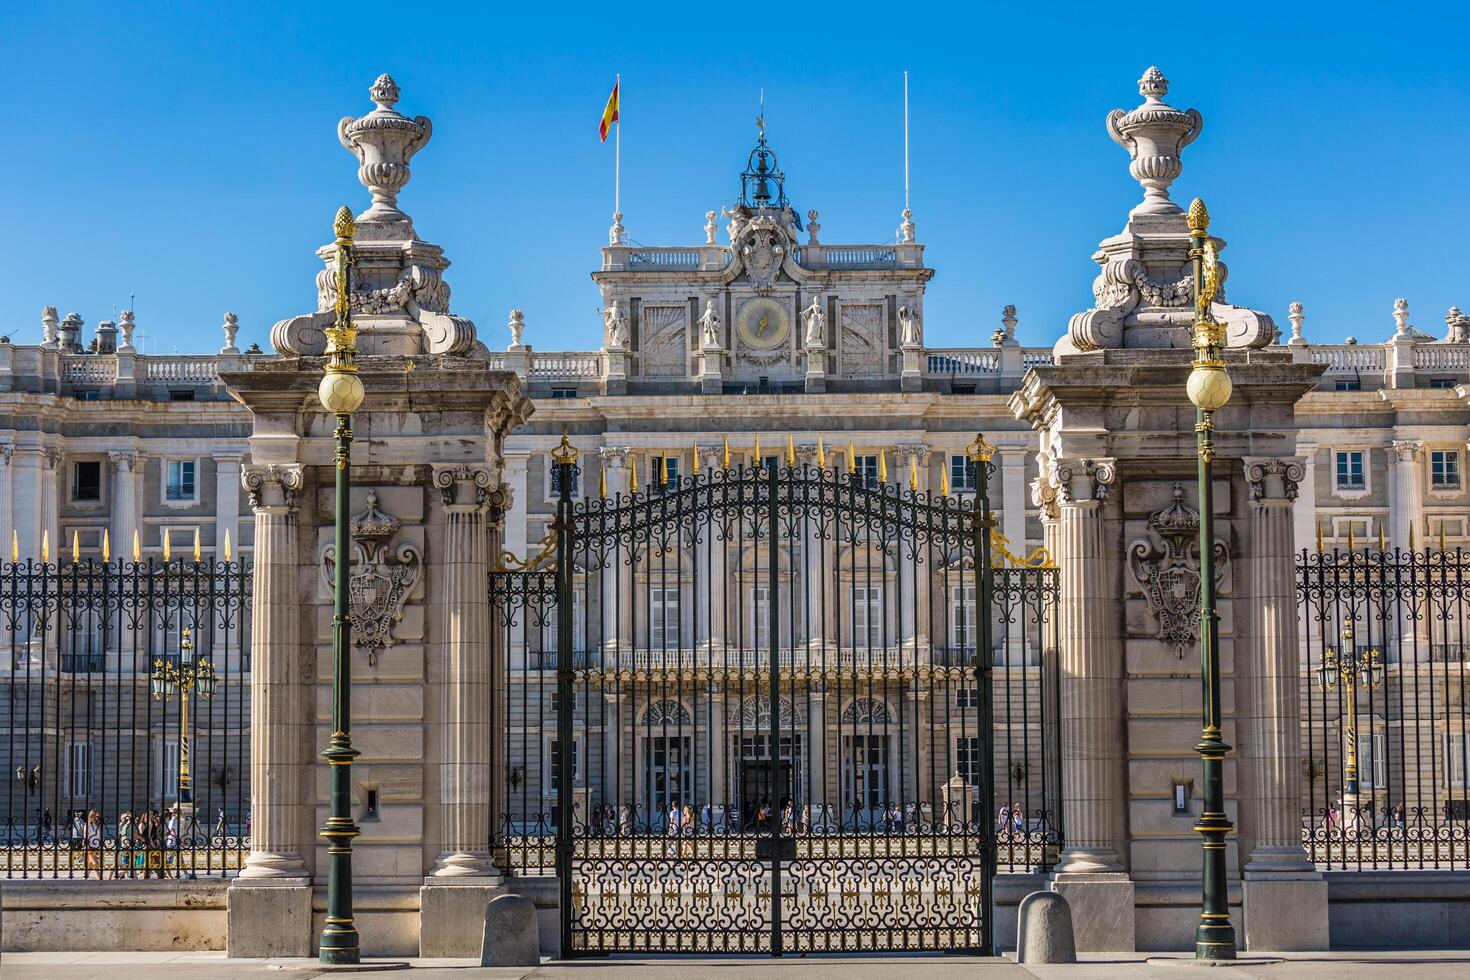 The Royal Palace of Madrid Palacio Real de Madrid, official residence of the Spanish Royal Family at the city of Madrid, Spain. photo